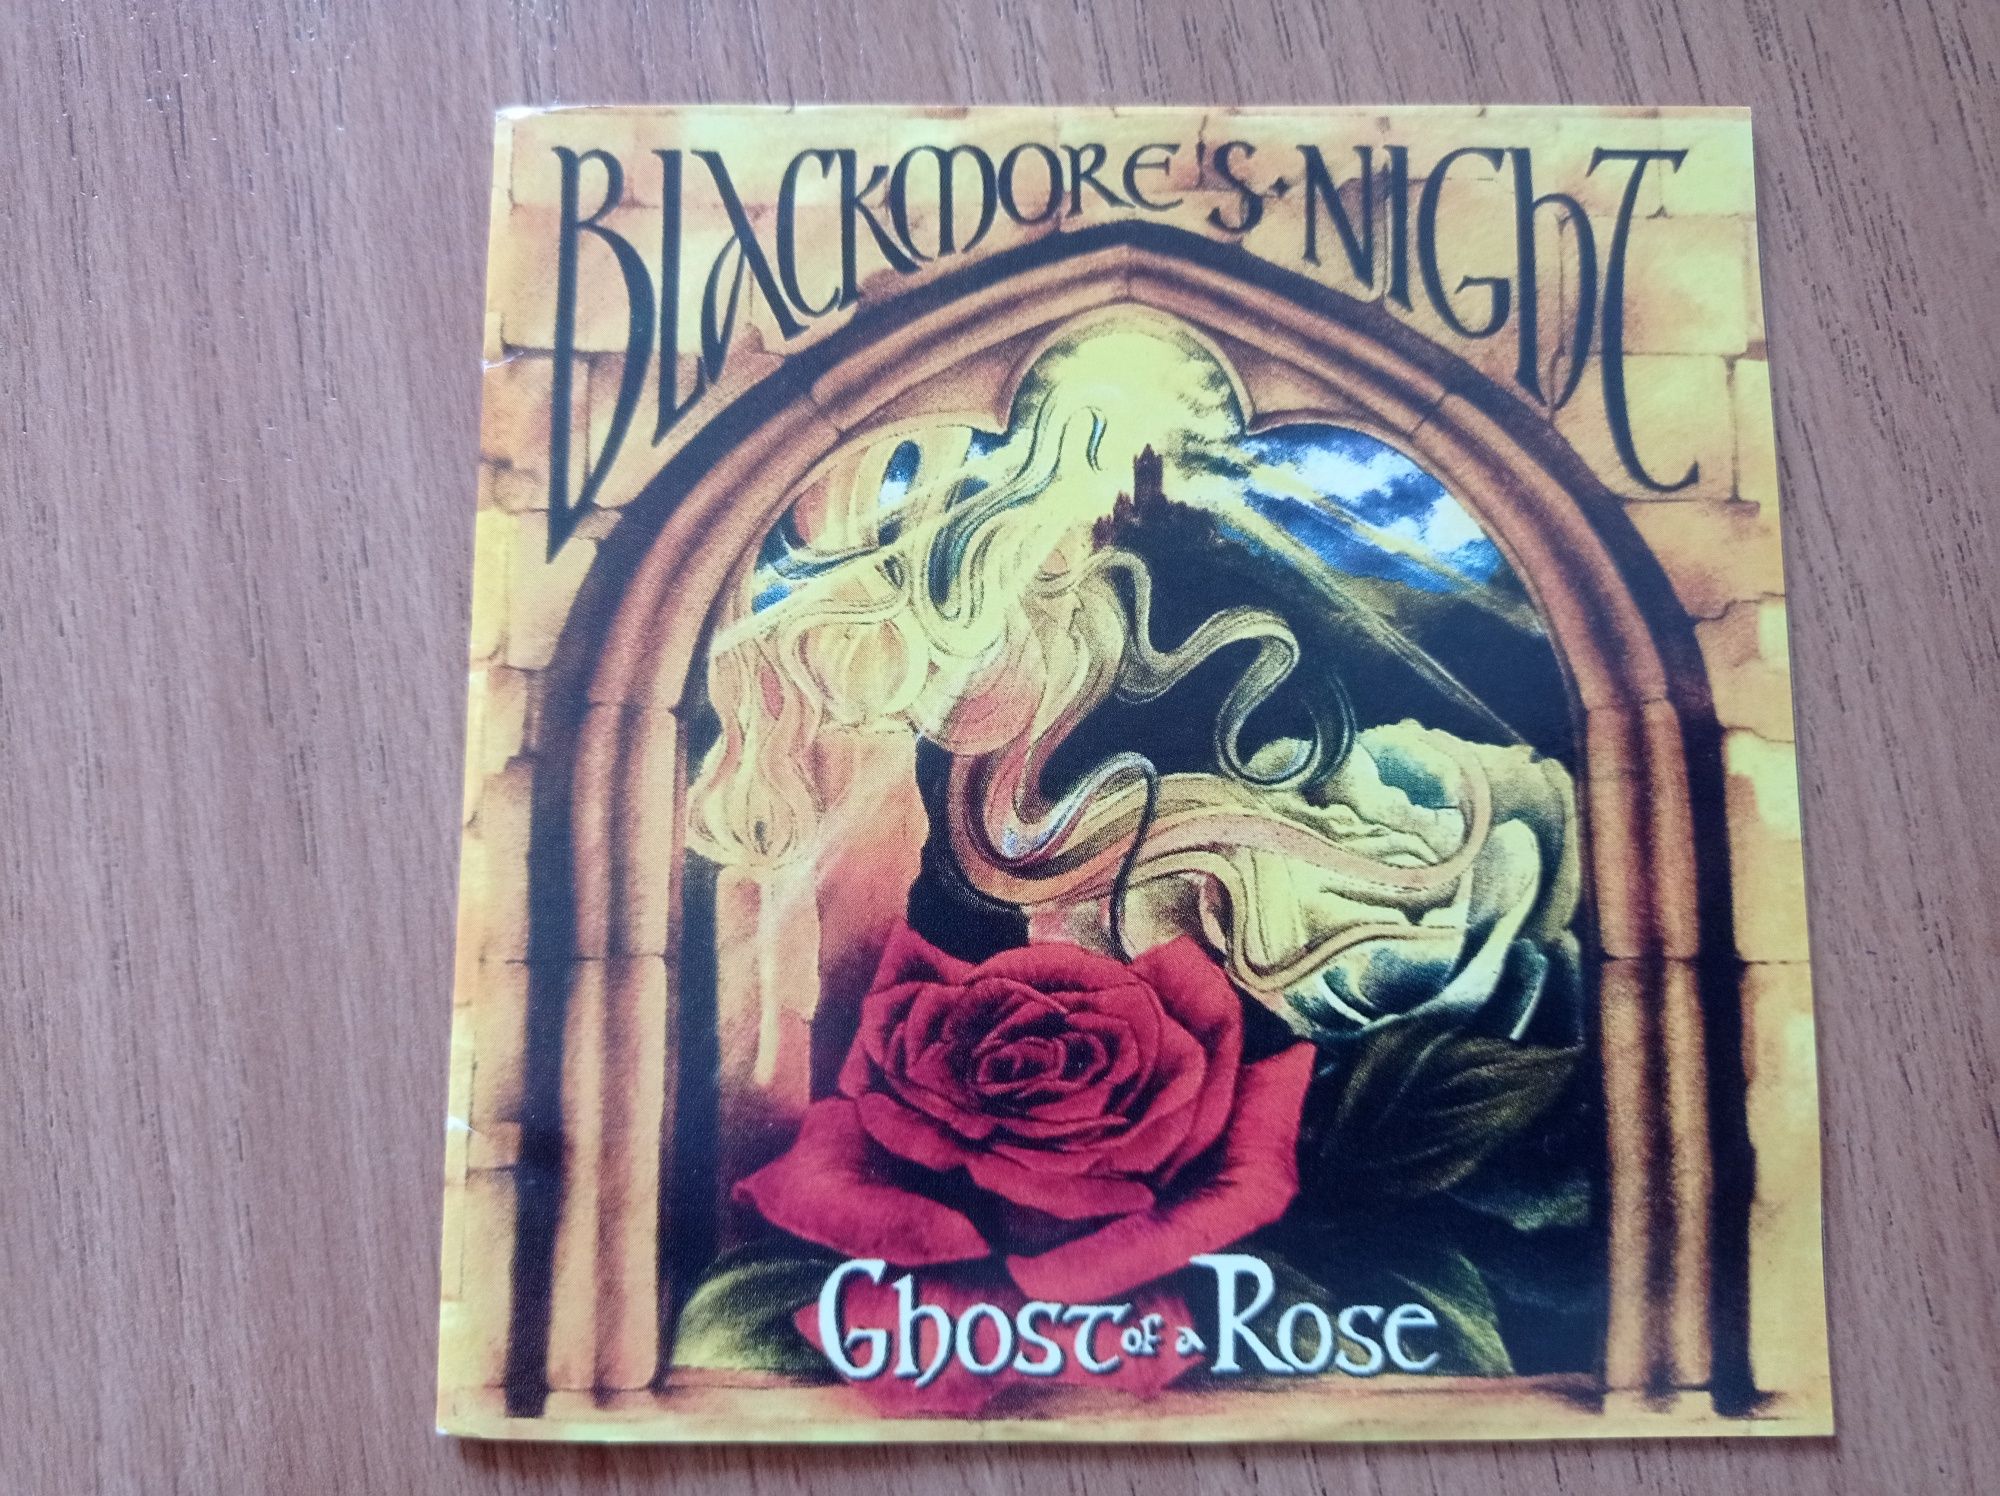 Blackmore' s Night - Ghost of a rose